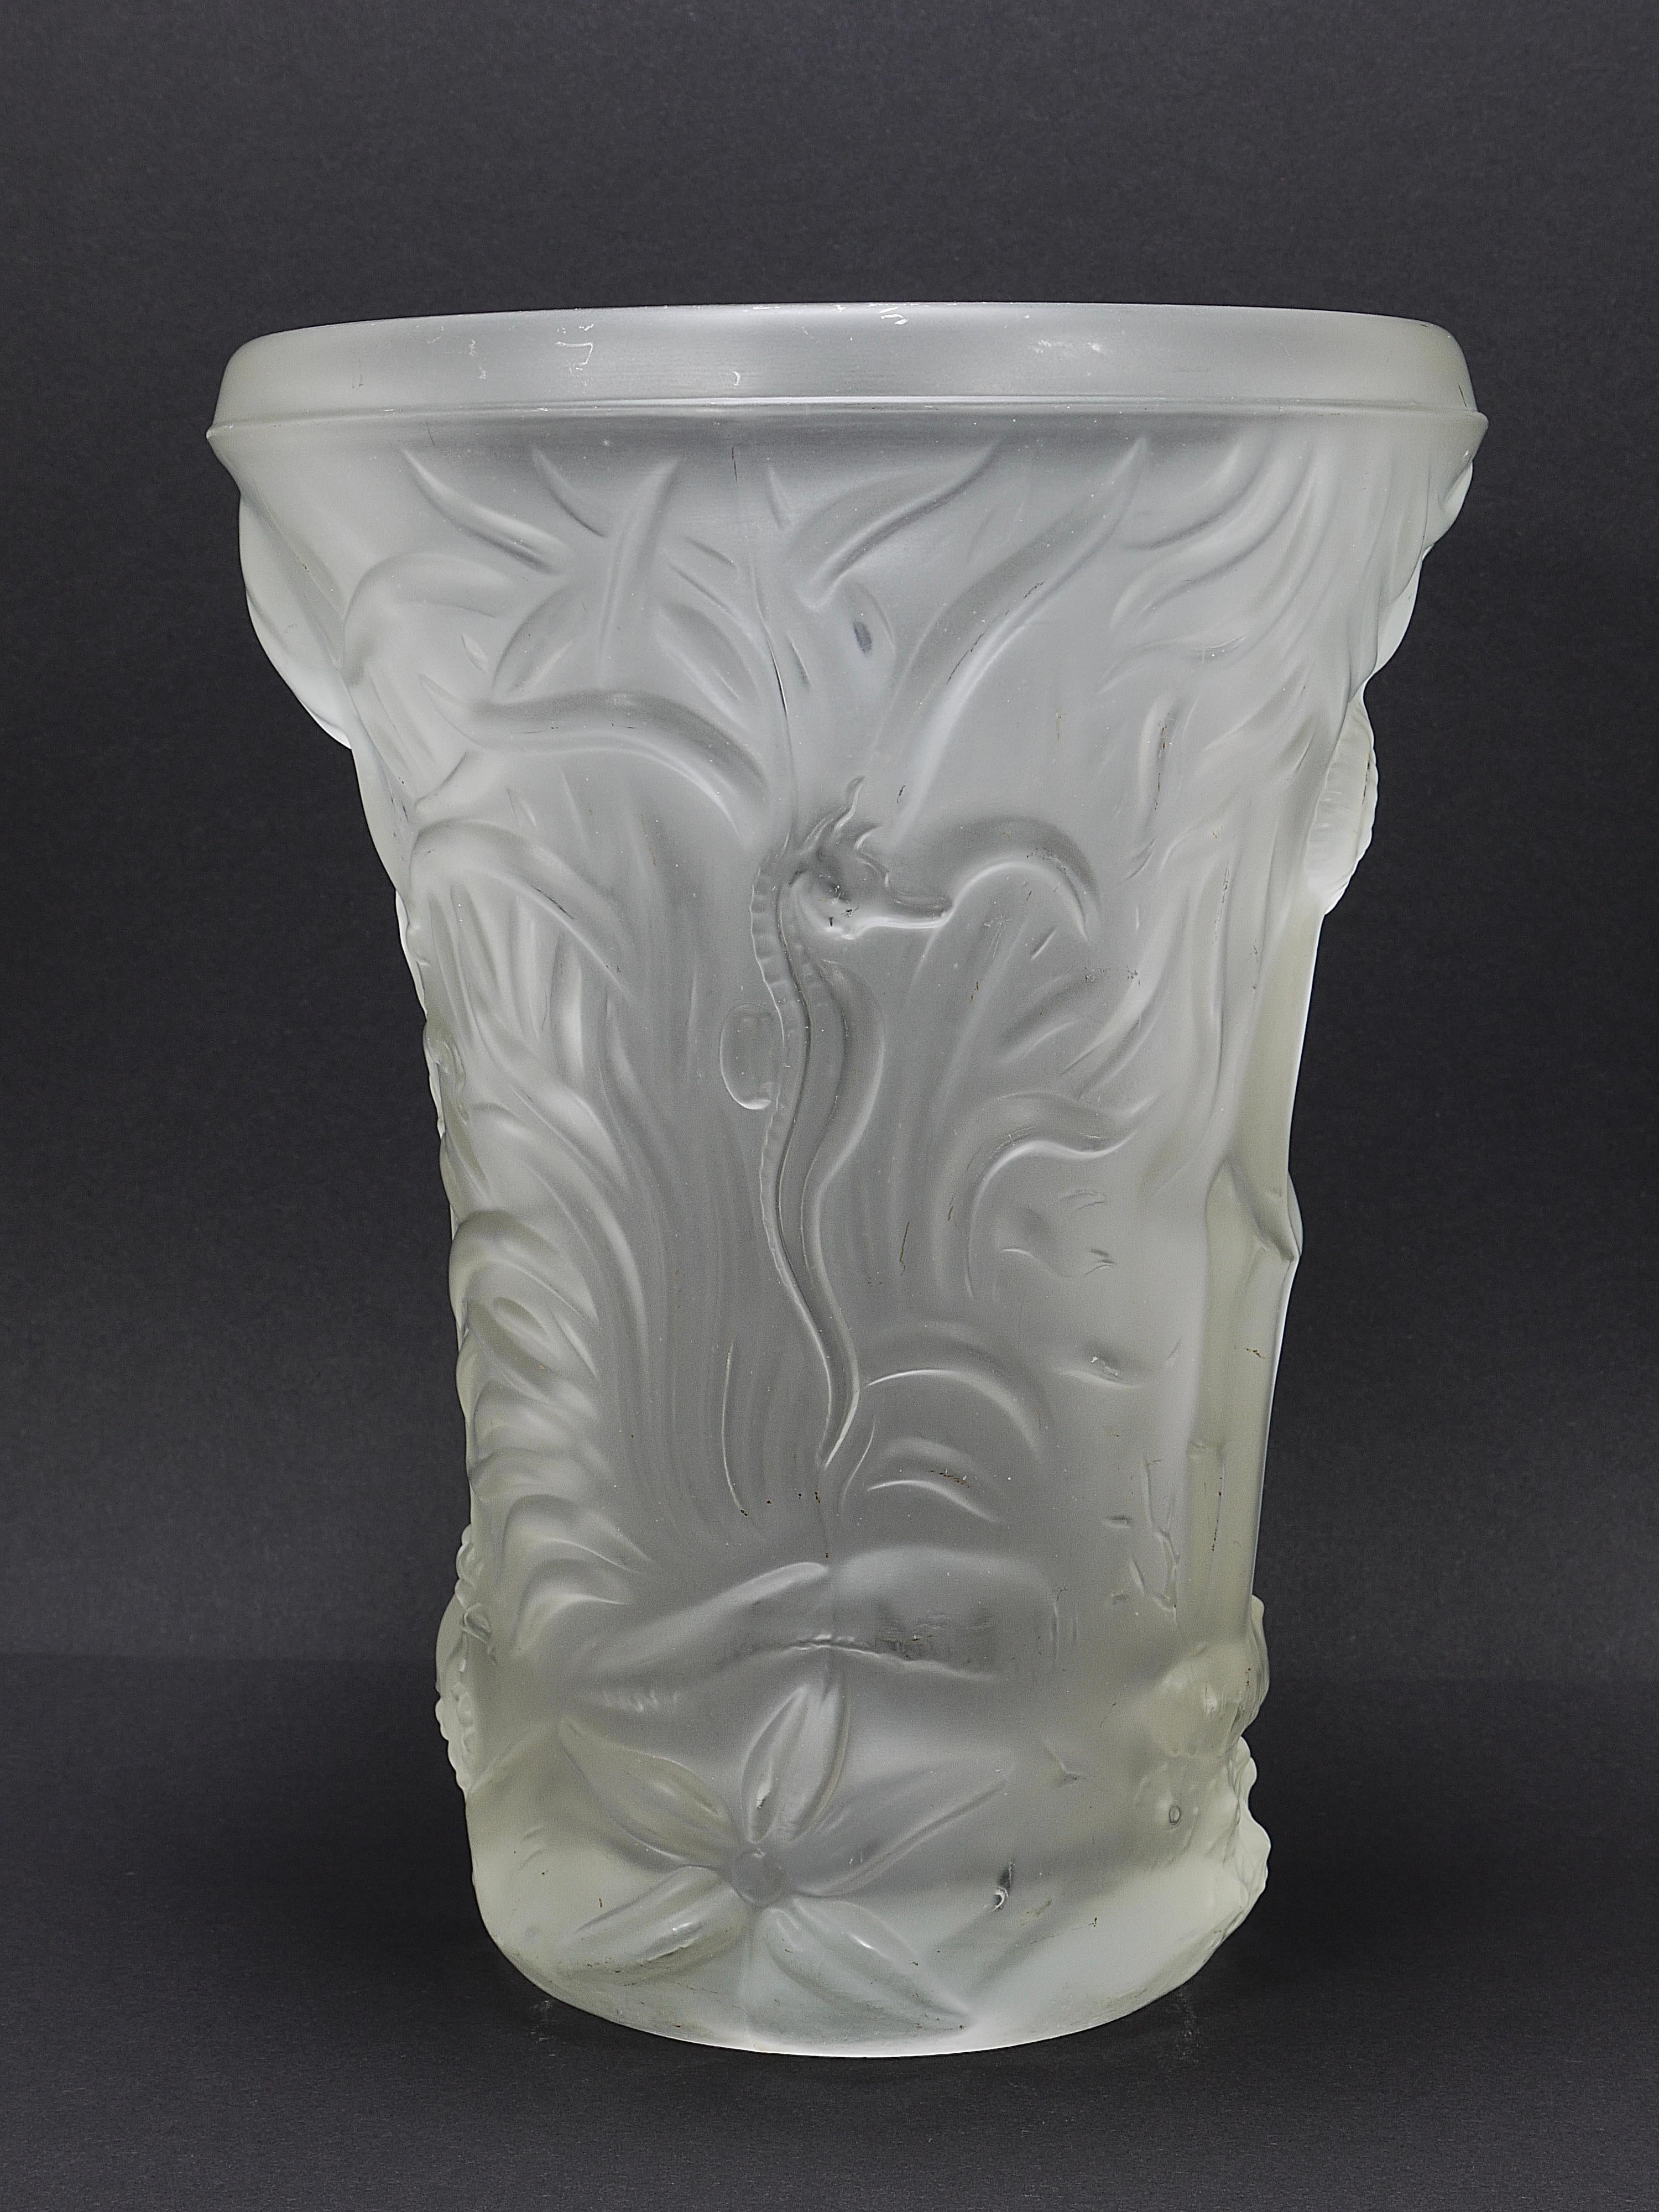 A large and solid Art Deco „Aquarium“ Vase from the 1930s, designed by Josef Inwald and manufactured in Czech Republic / former Czechoslovakia. Made of frosted / satined art glass. Decorated with a lovely underwater scenery, displaying various sea